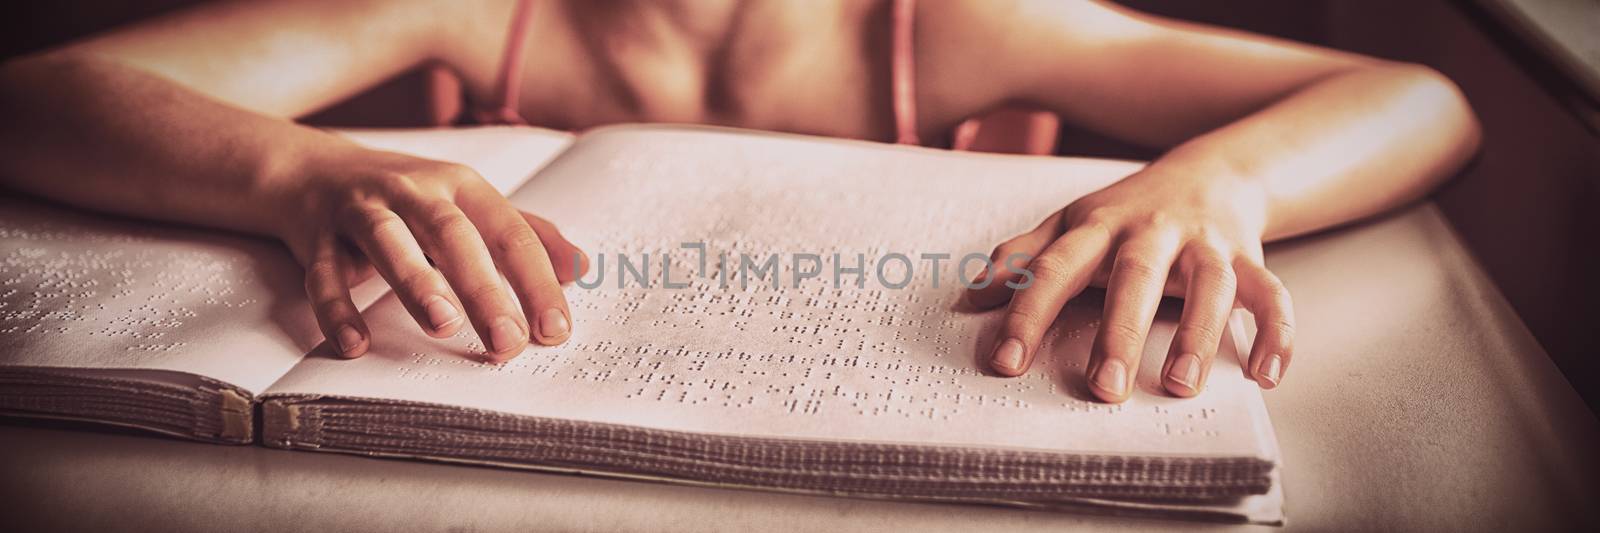 Blind girl using both hands to read braille in a room